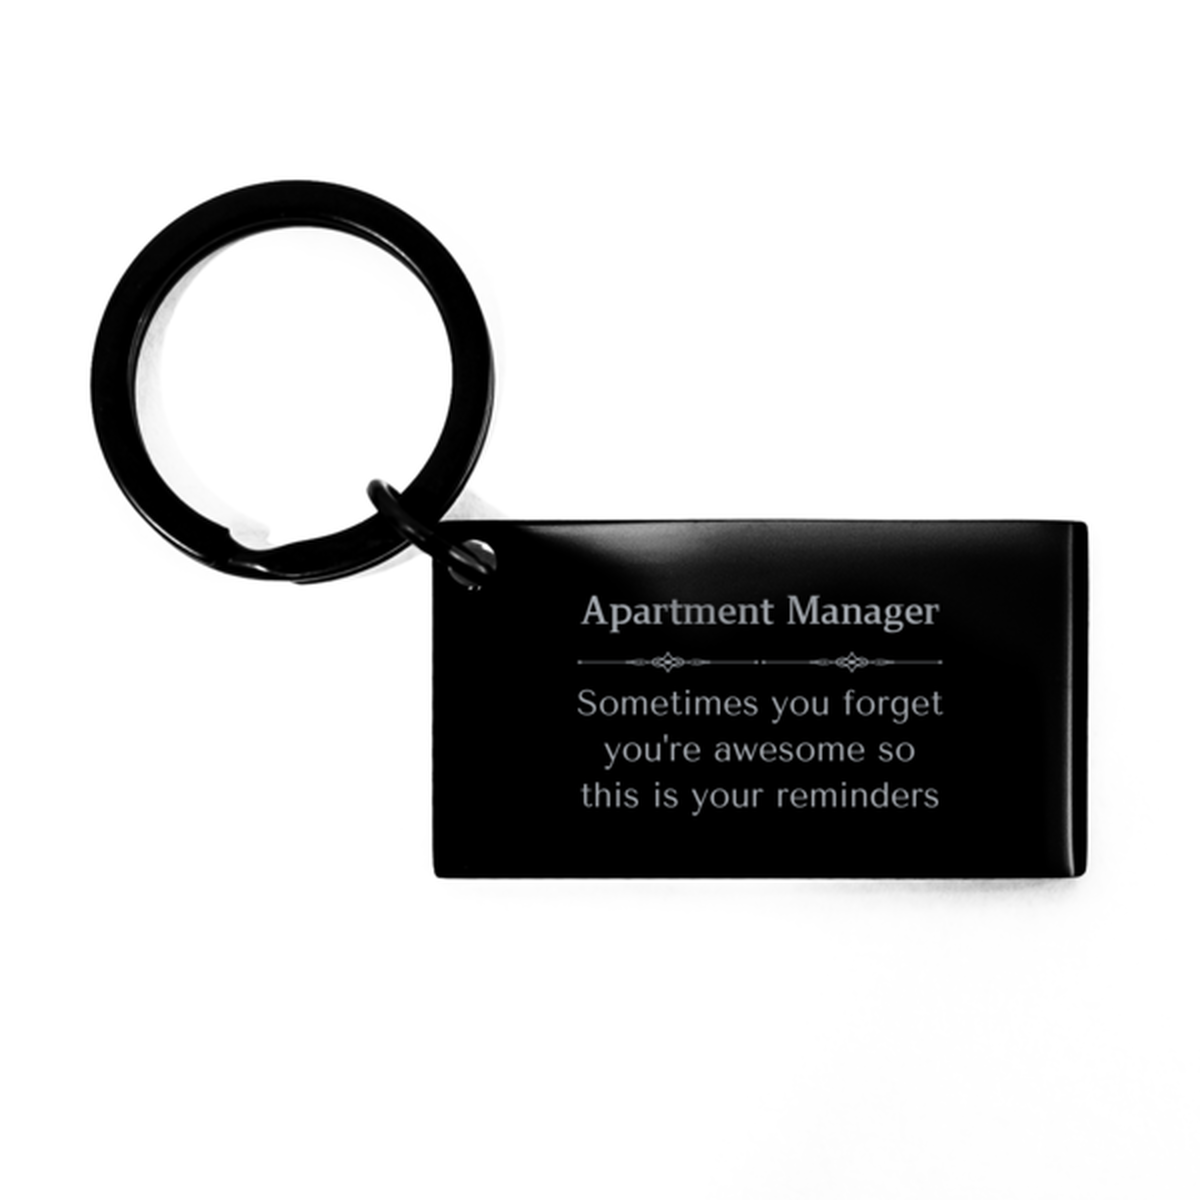 Sentimental Apartment Manager Keychain, Clerk Sometimes you forget you're awesome so this is your reminders, Graduation Christmas Birthday Gifts for Apartment Manager, Men, Women, Coworkers